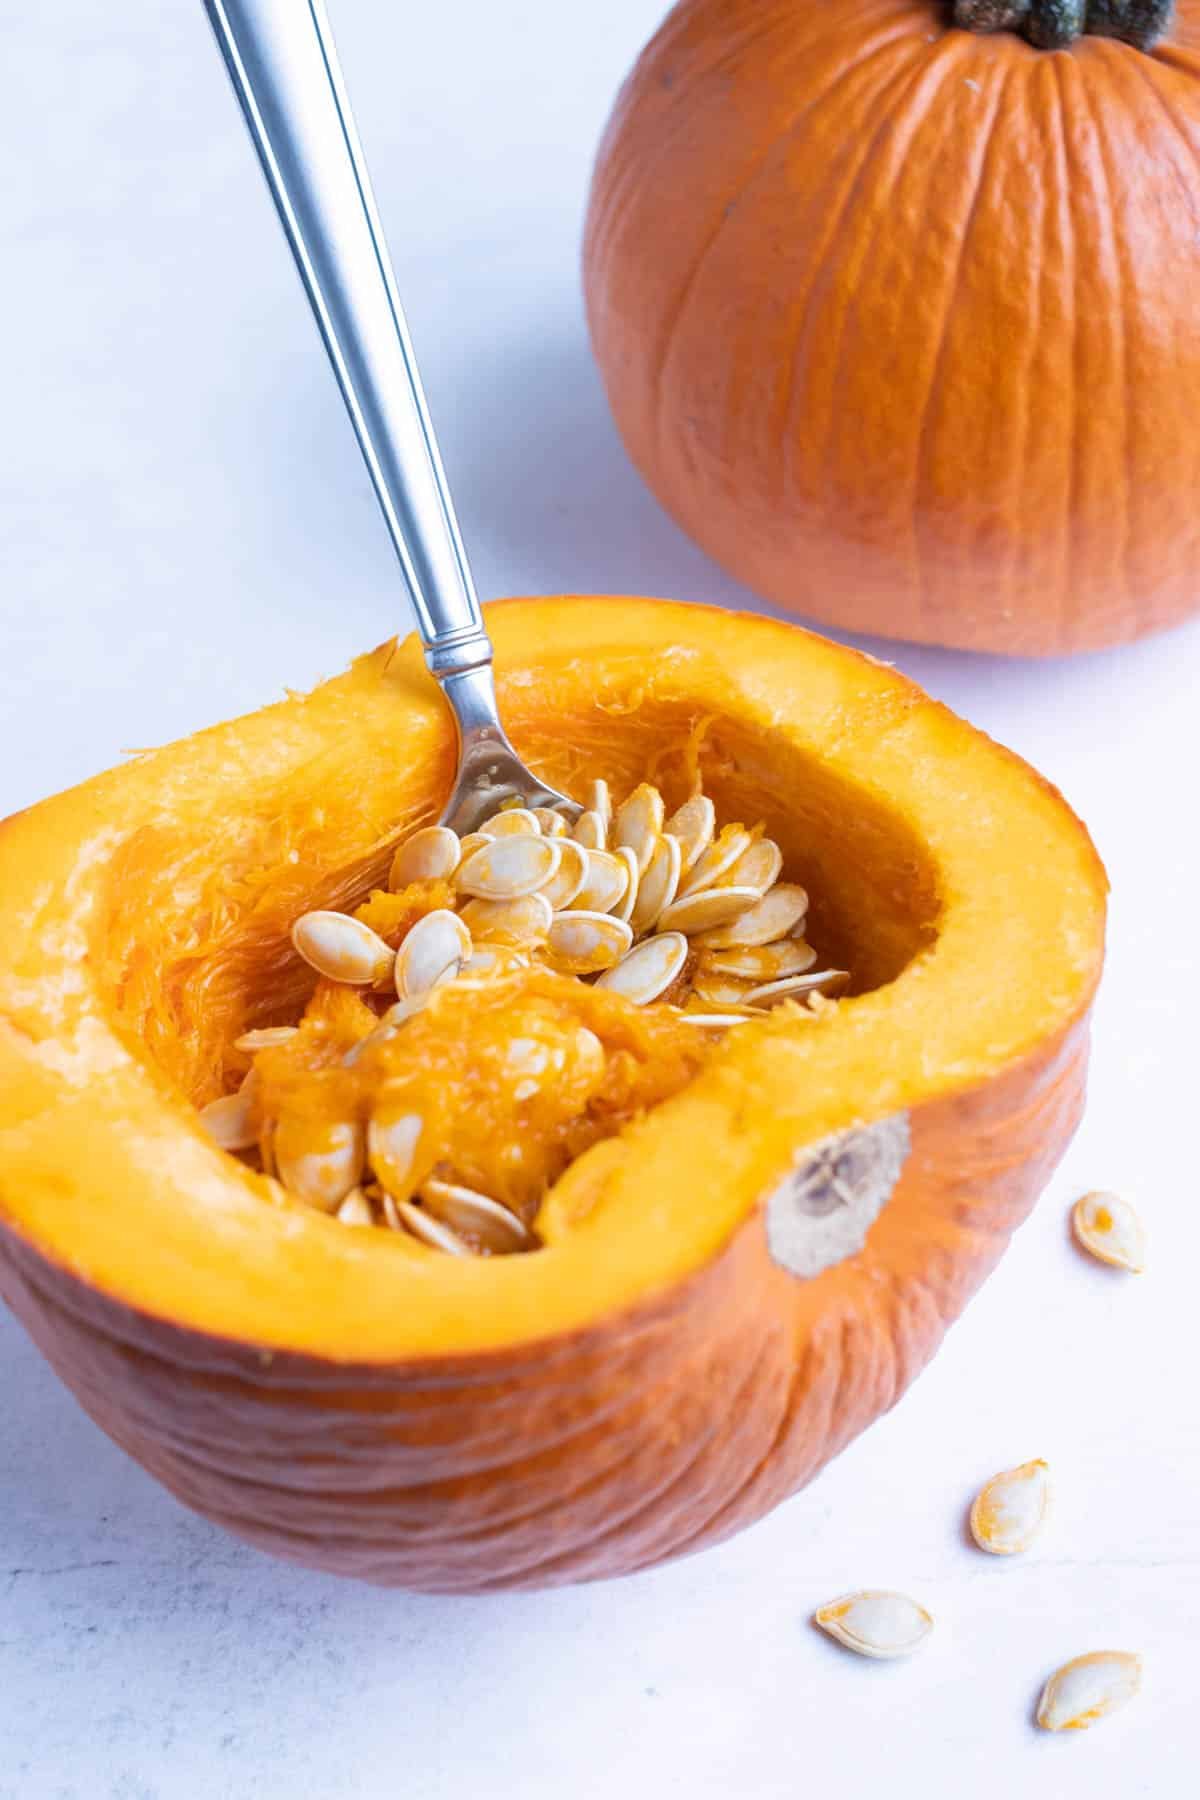 Insides are removed from the pumpkin halves with a spoon.